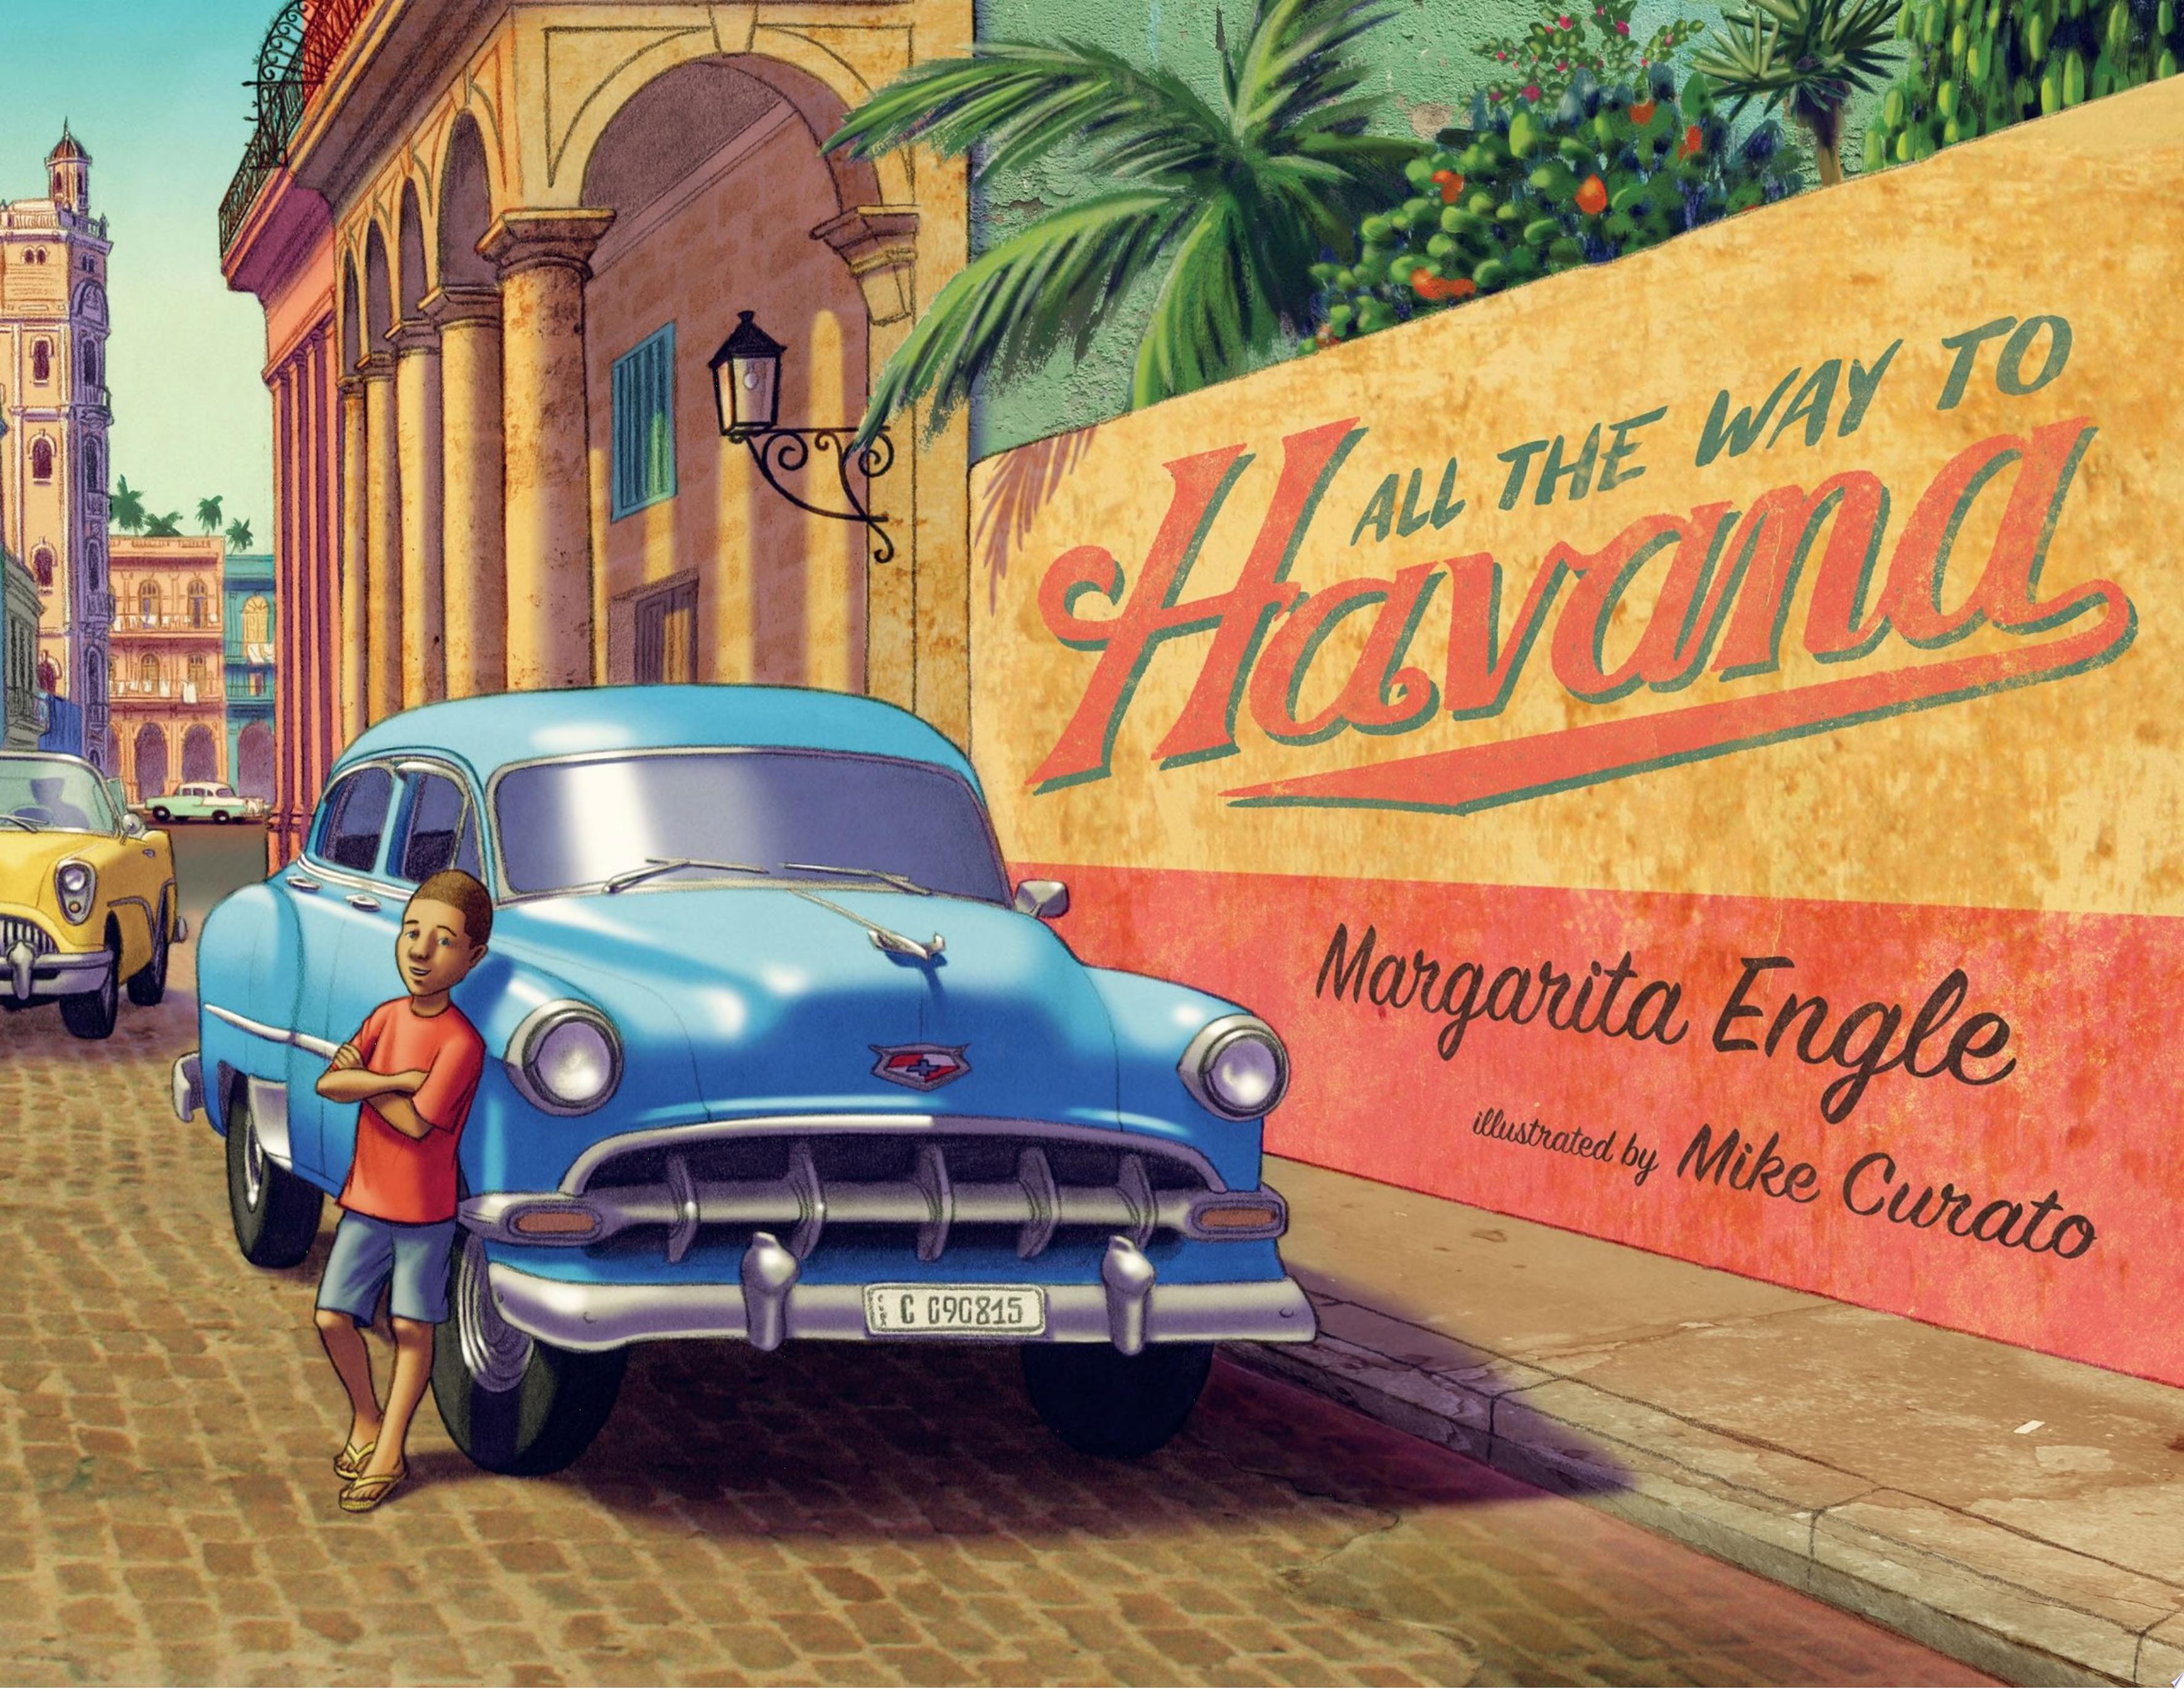 Image for "All the Way to Havana"